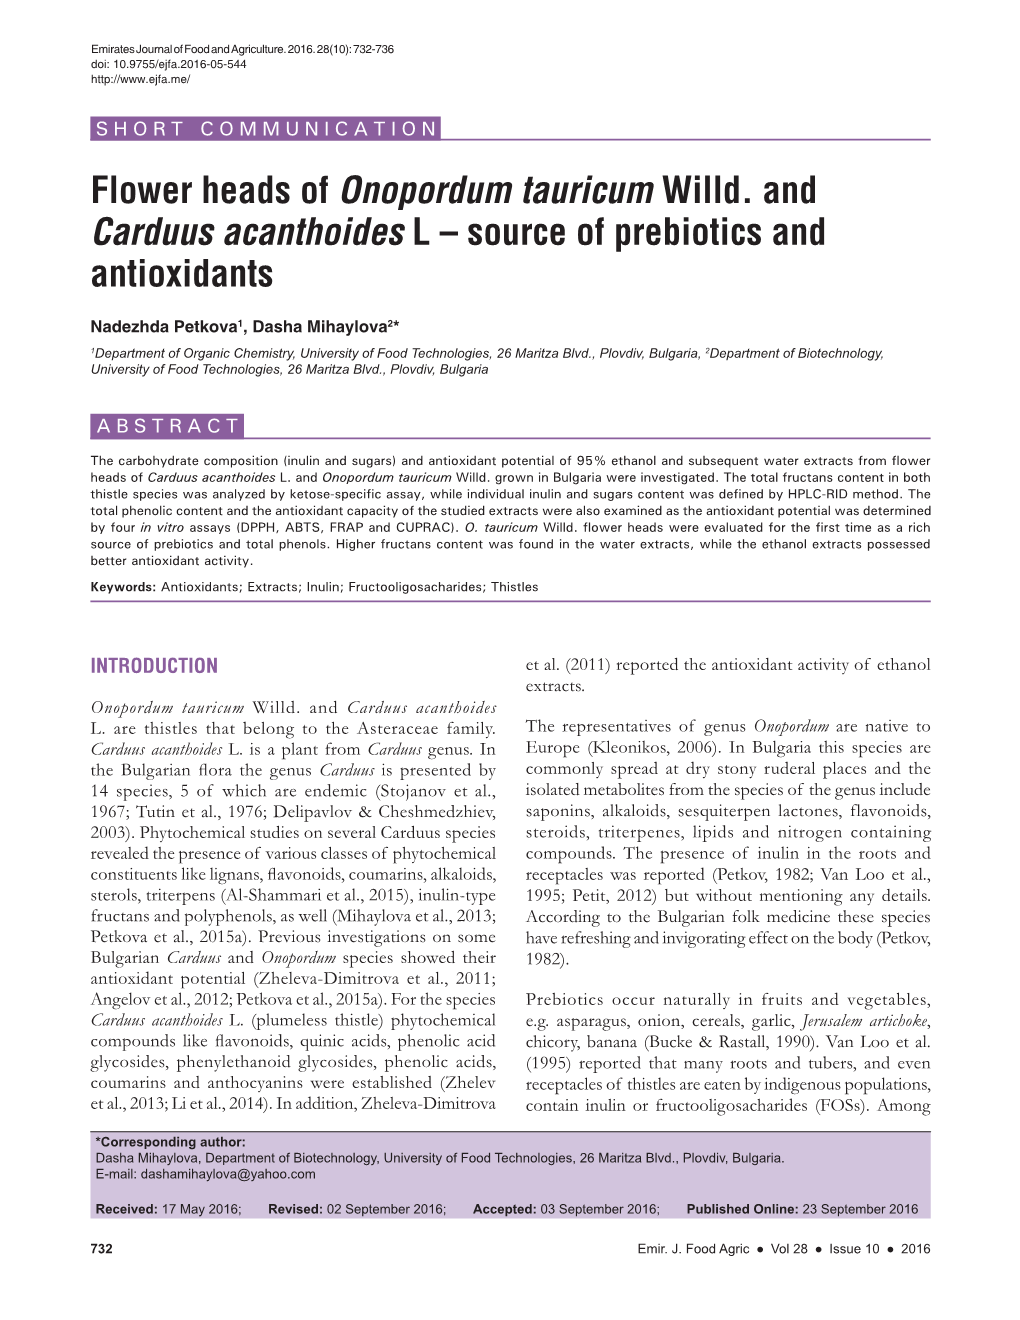 Flower Heads of Onopordum Tauricum Willd. and Carduus Acanthoides L – Source of Prebiotics and Antioxidants